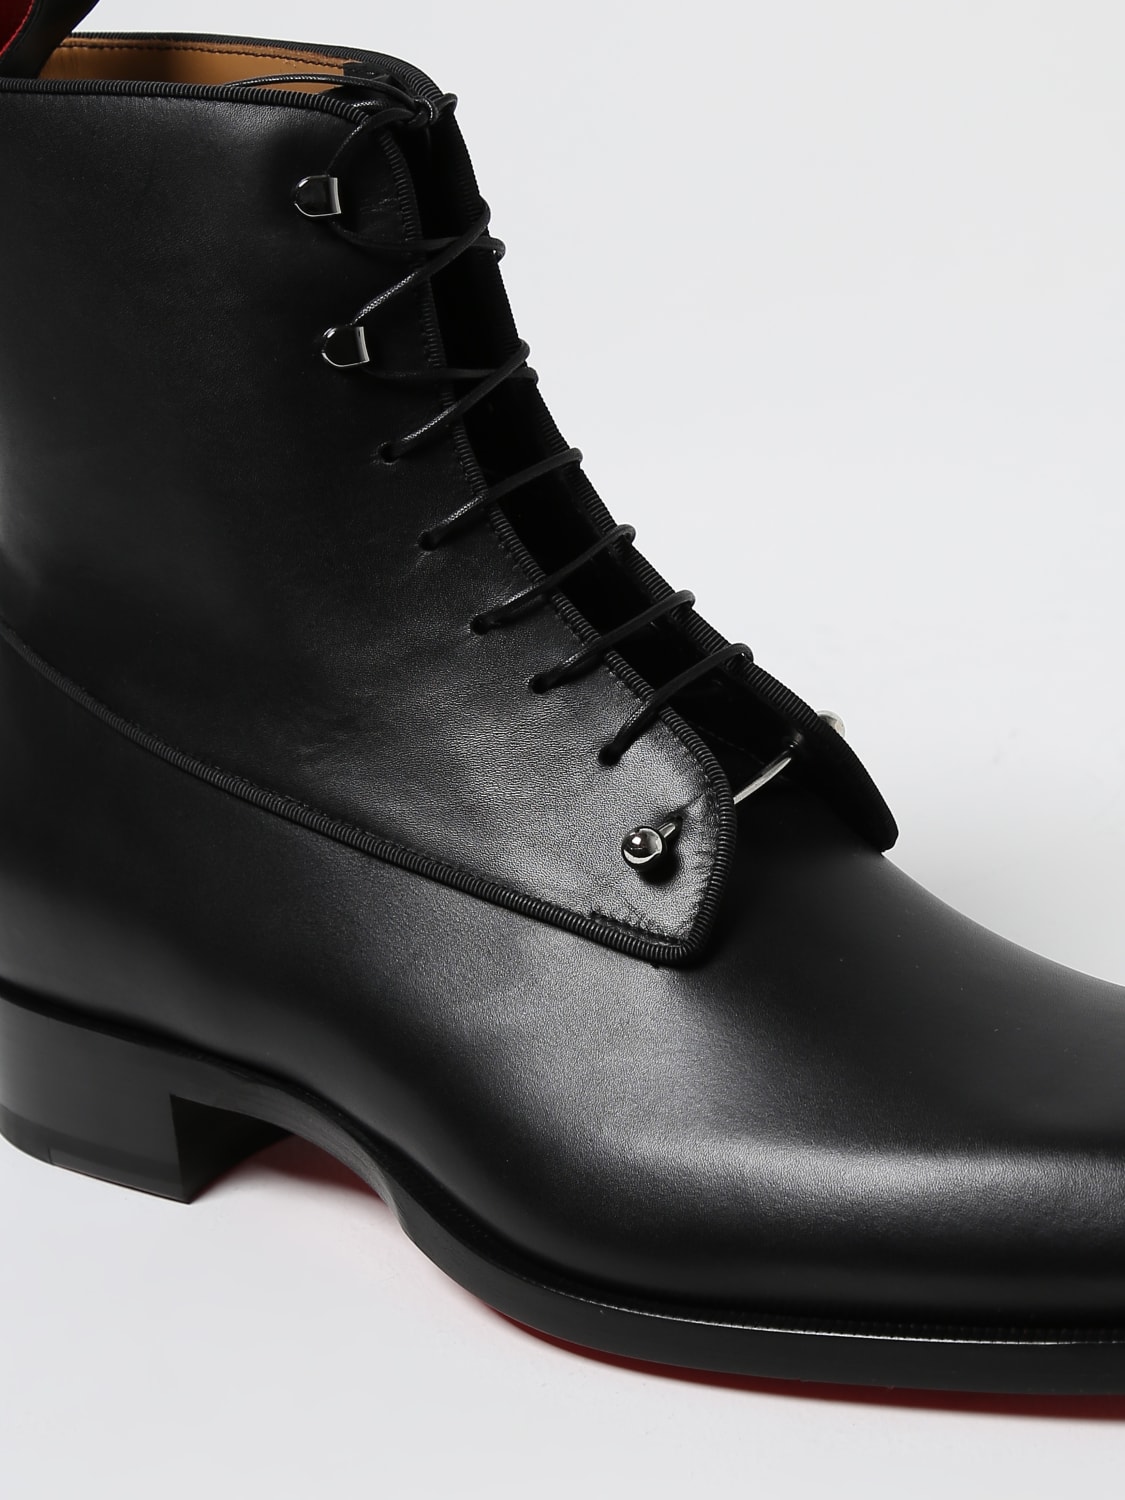 CHRISTIAN LOUBOUTIN: Chambeli leather ankle boots - Black